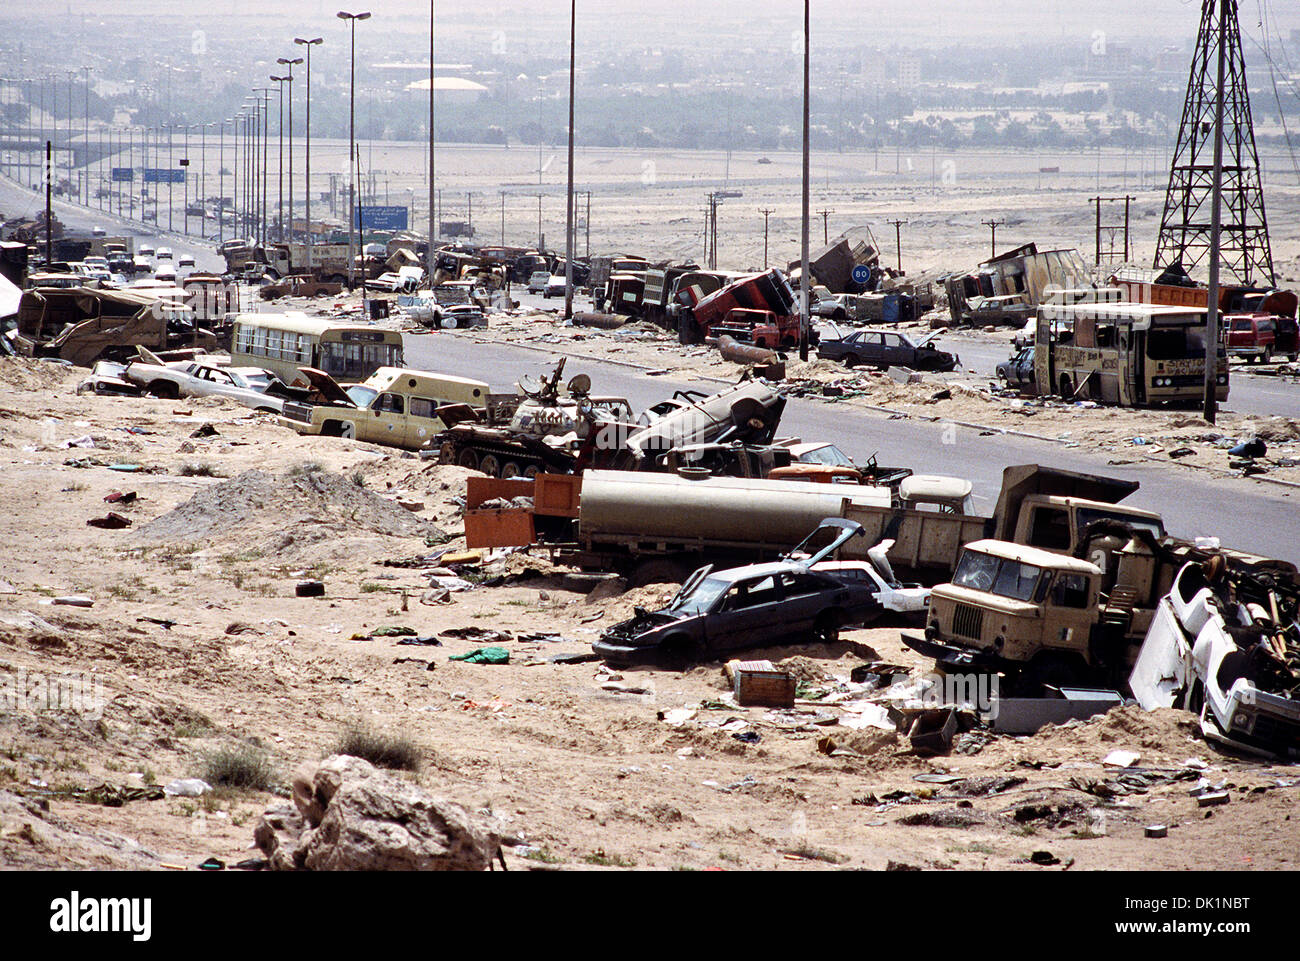 Demolished vehicles litter Kuwait Highway 8, the route fleeing Iraqi forces took as they retreated from Kuwait during Operation Desert Storm April 18, 1991 in Kuwait. The road is known as the 'highway of death' because of the number of vehicles destroyed by allied forces. Stock Photo